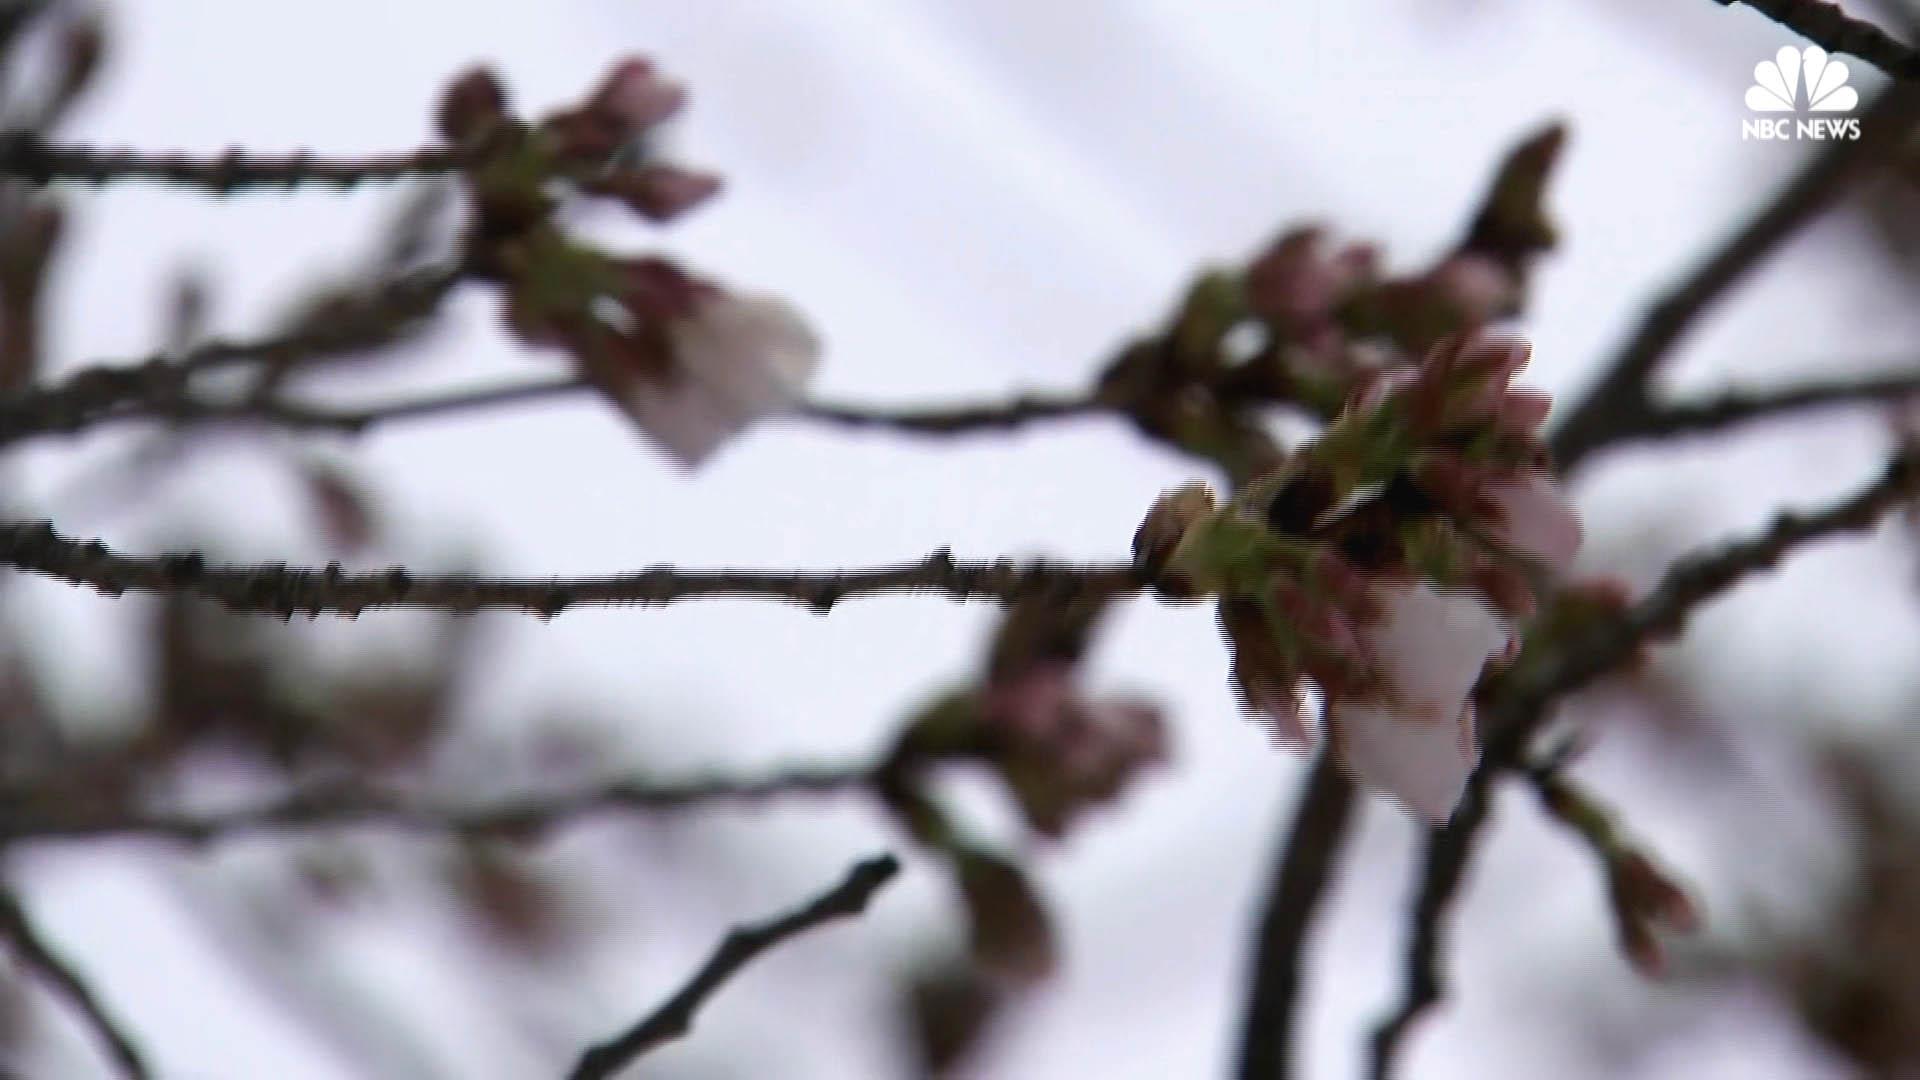 D.C.'s Cherry Blossoms Losing Half Their Blooms Due to Weather - NBC ...